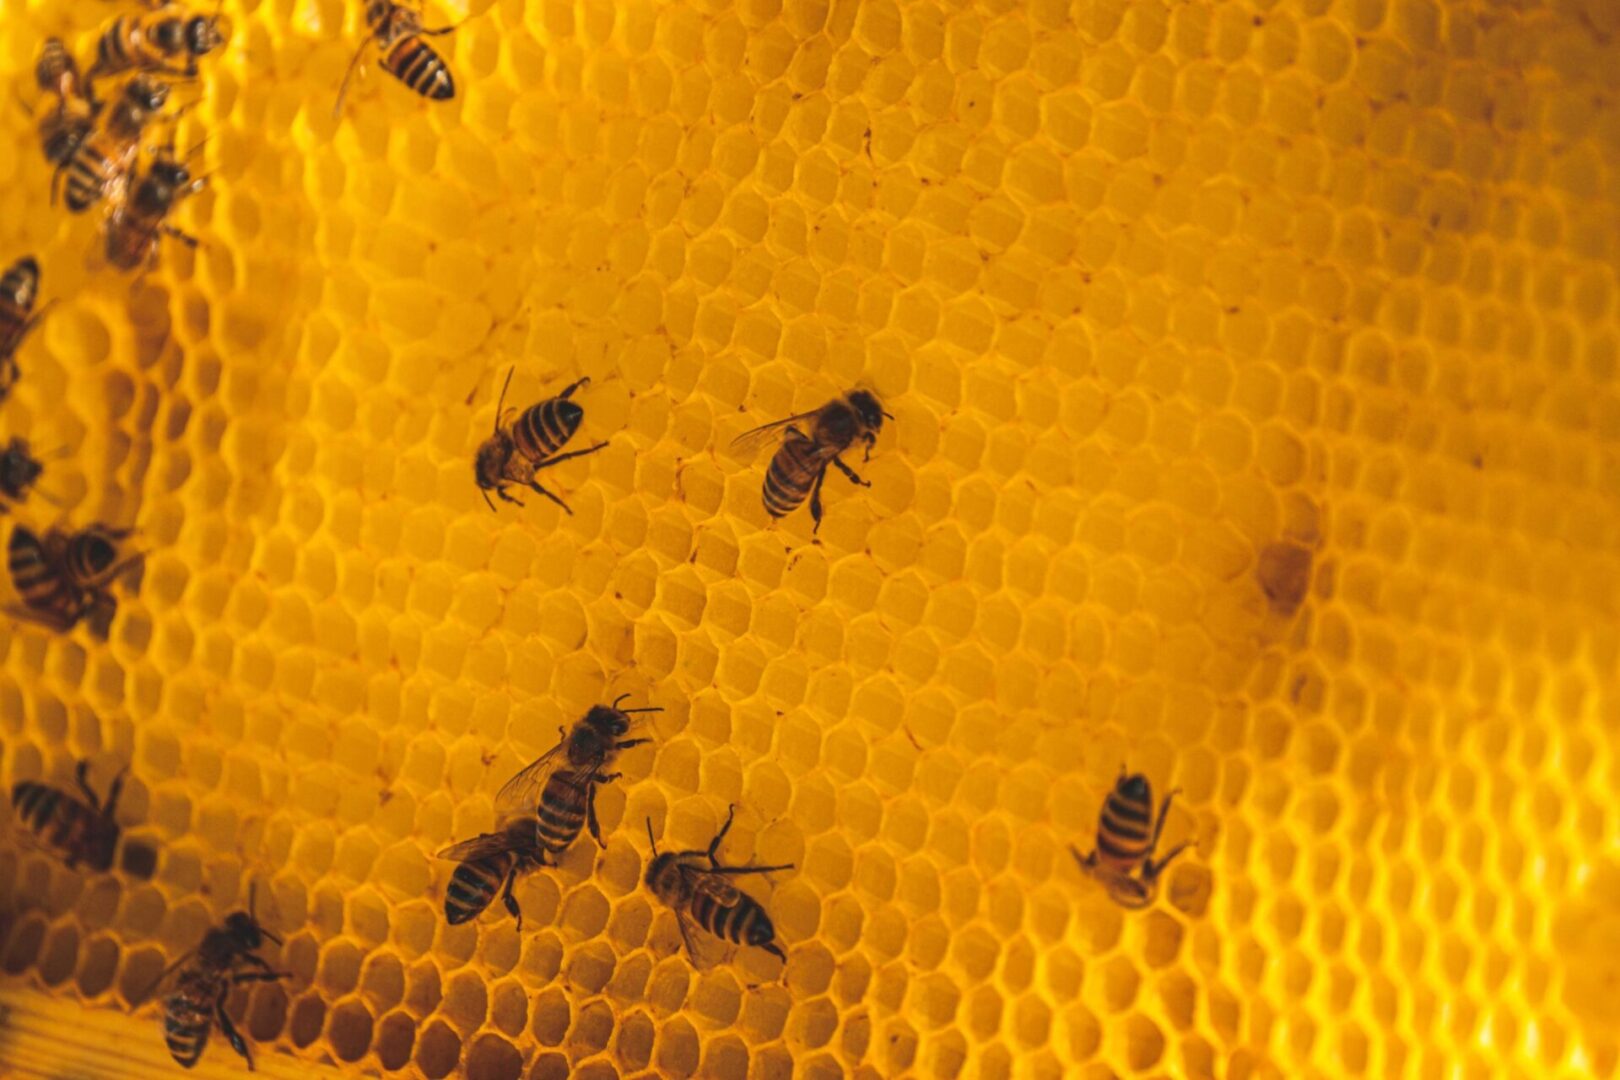 A group of bees on top of a honeycomb.